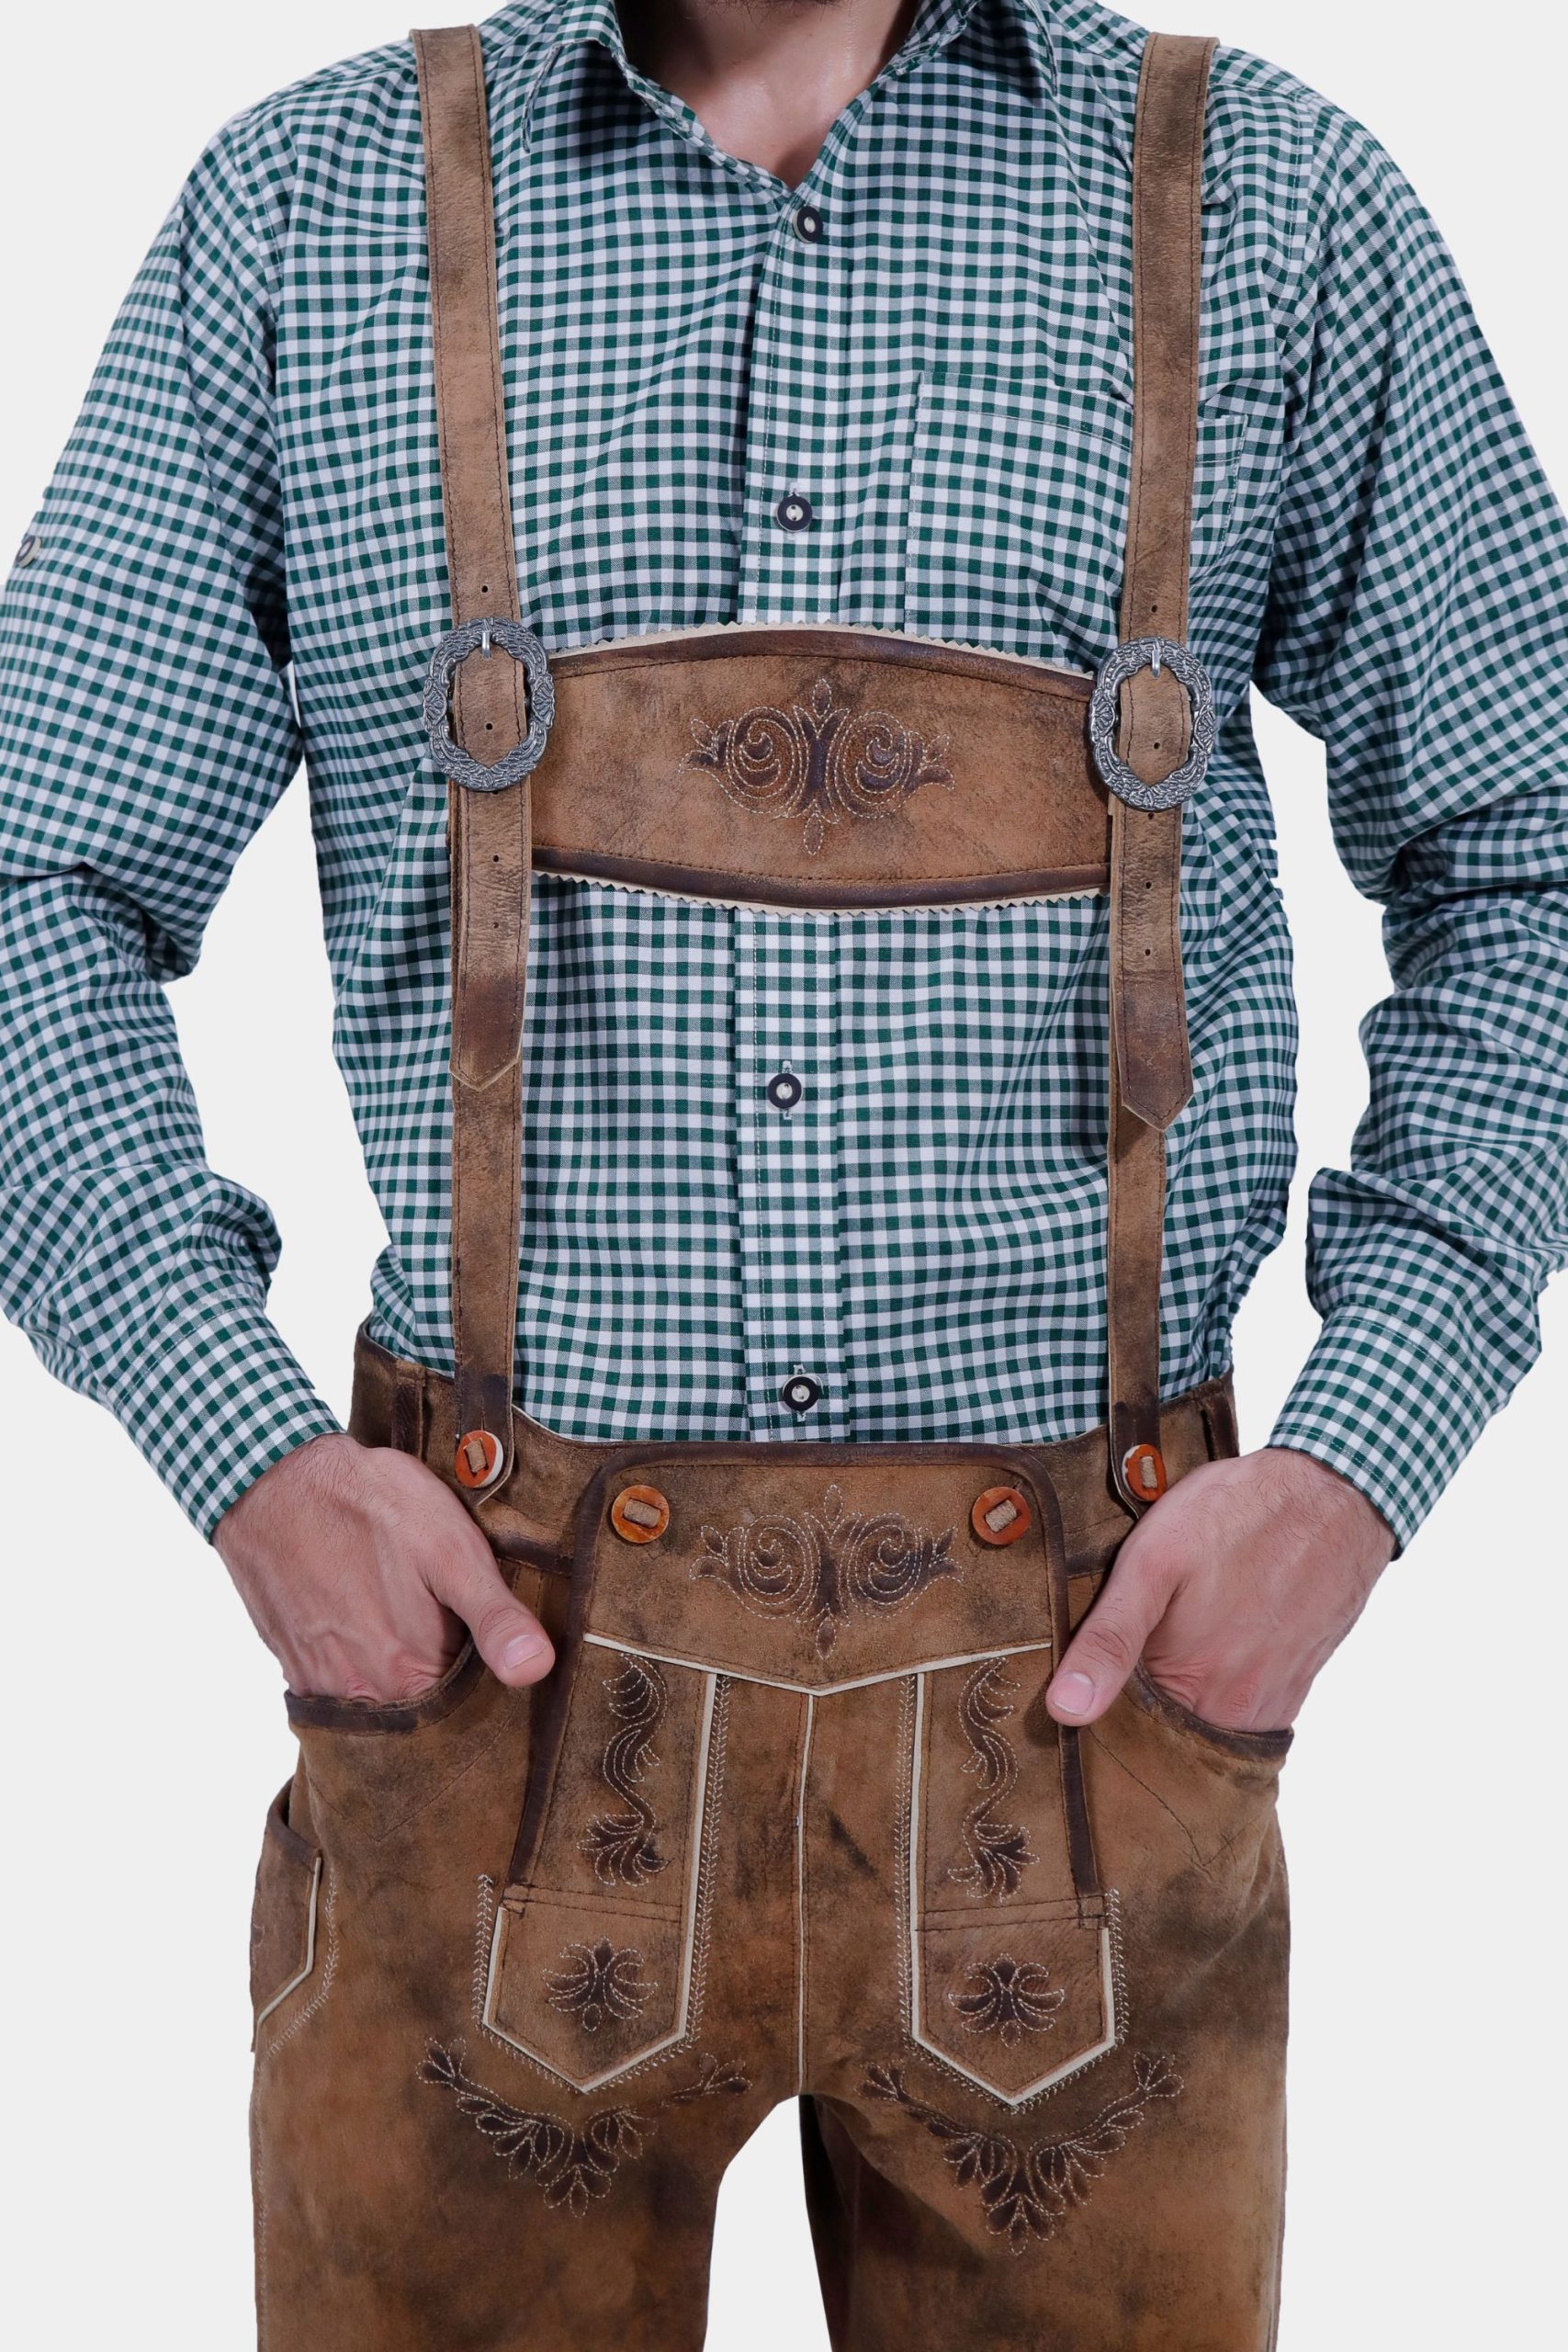 Man wearing Acropolis Suspenders made of high-quality leather, featuring intricate alpine embroidery, paired with Acropolis Bundhosen and a green checkered shirt.